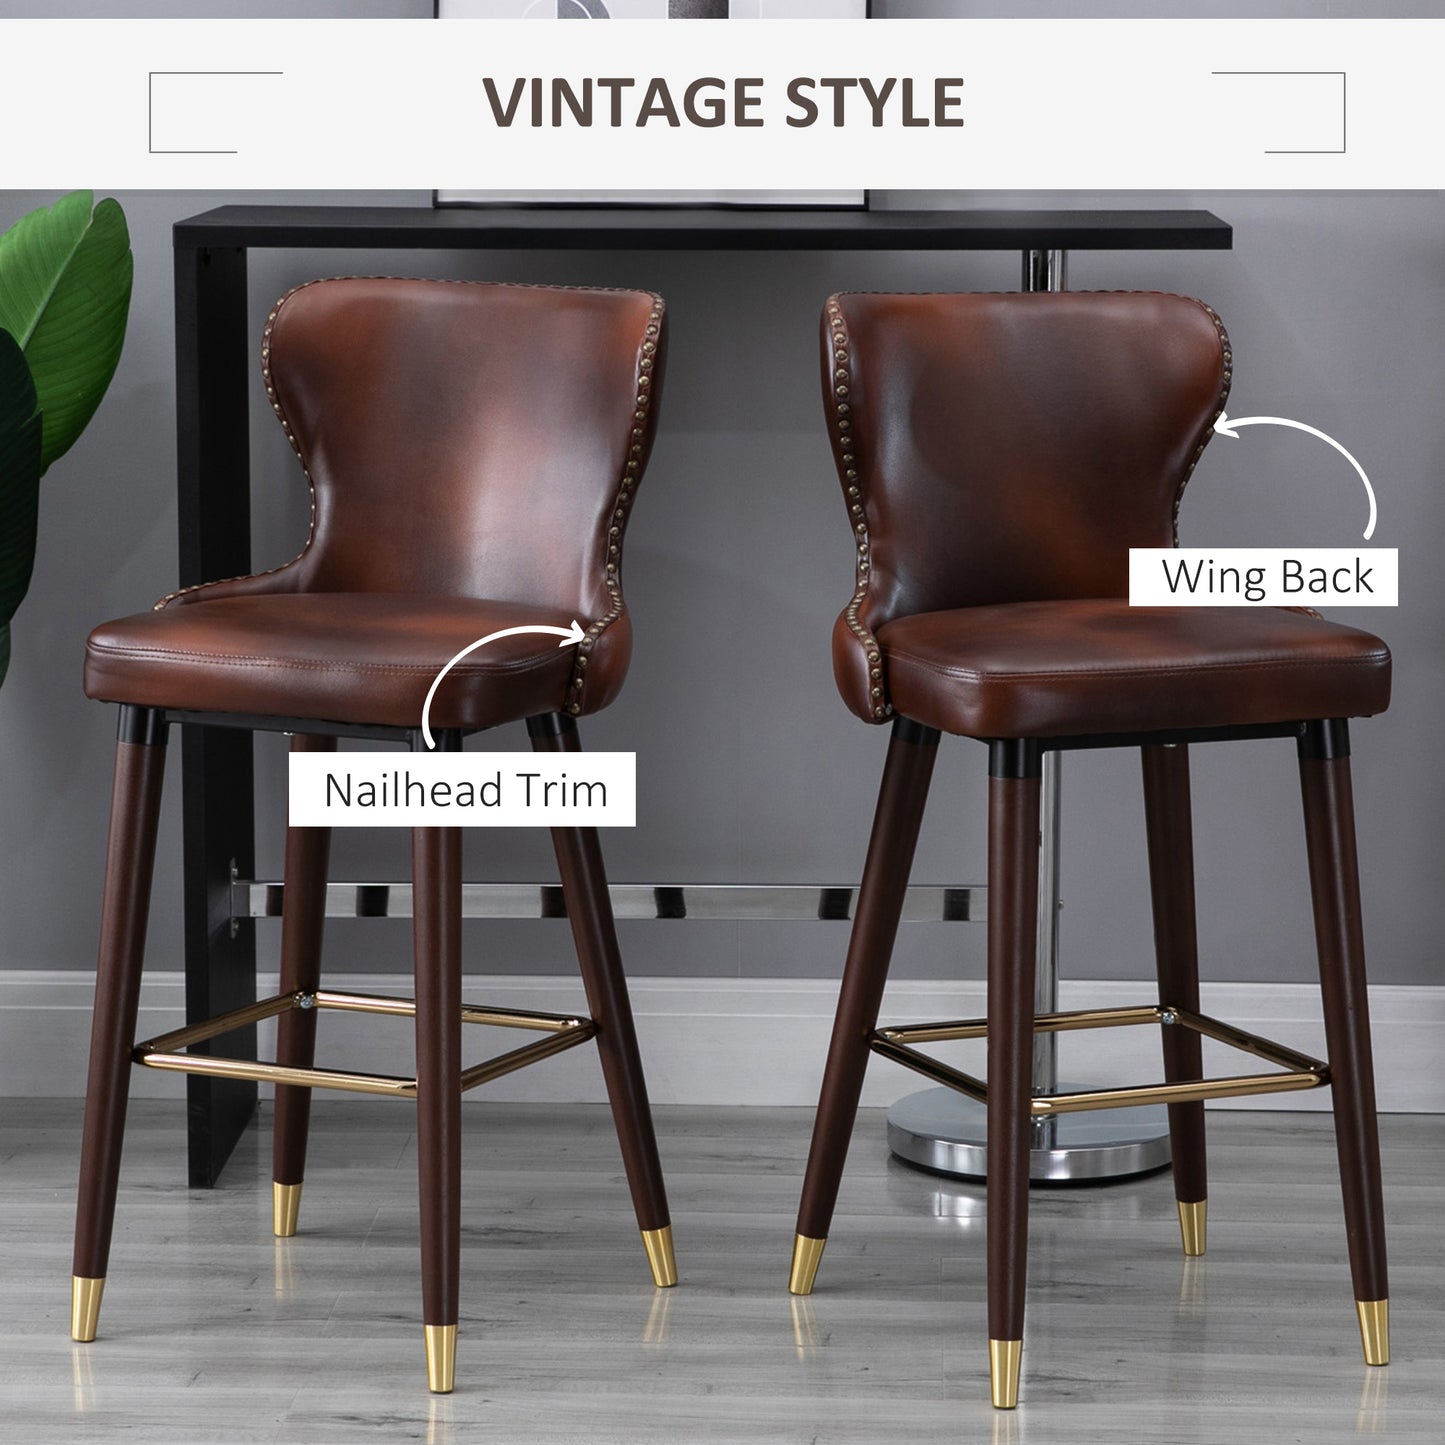 HOMCOM Bar Stools Set of 2, PU Leather Vintage Counter-Height Bar Chair, Luxury European Style Kitchen Stools with Back, Brown